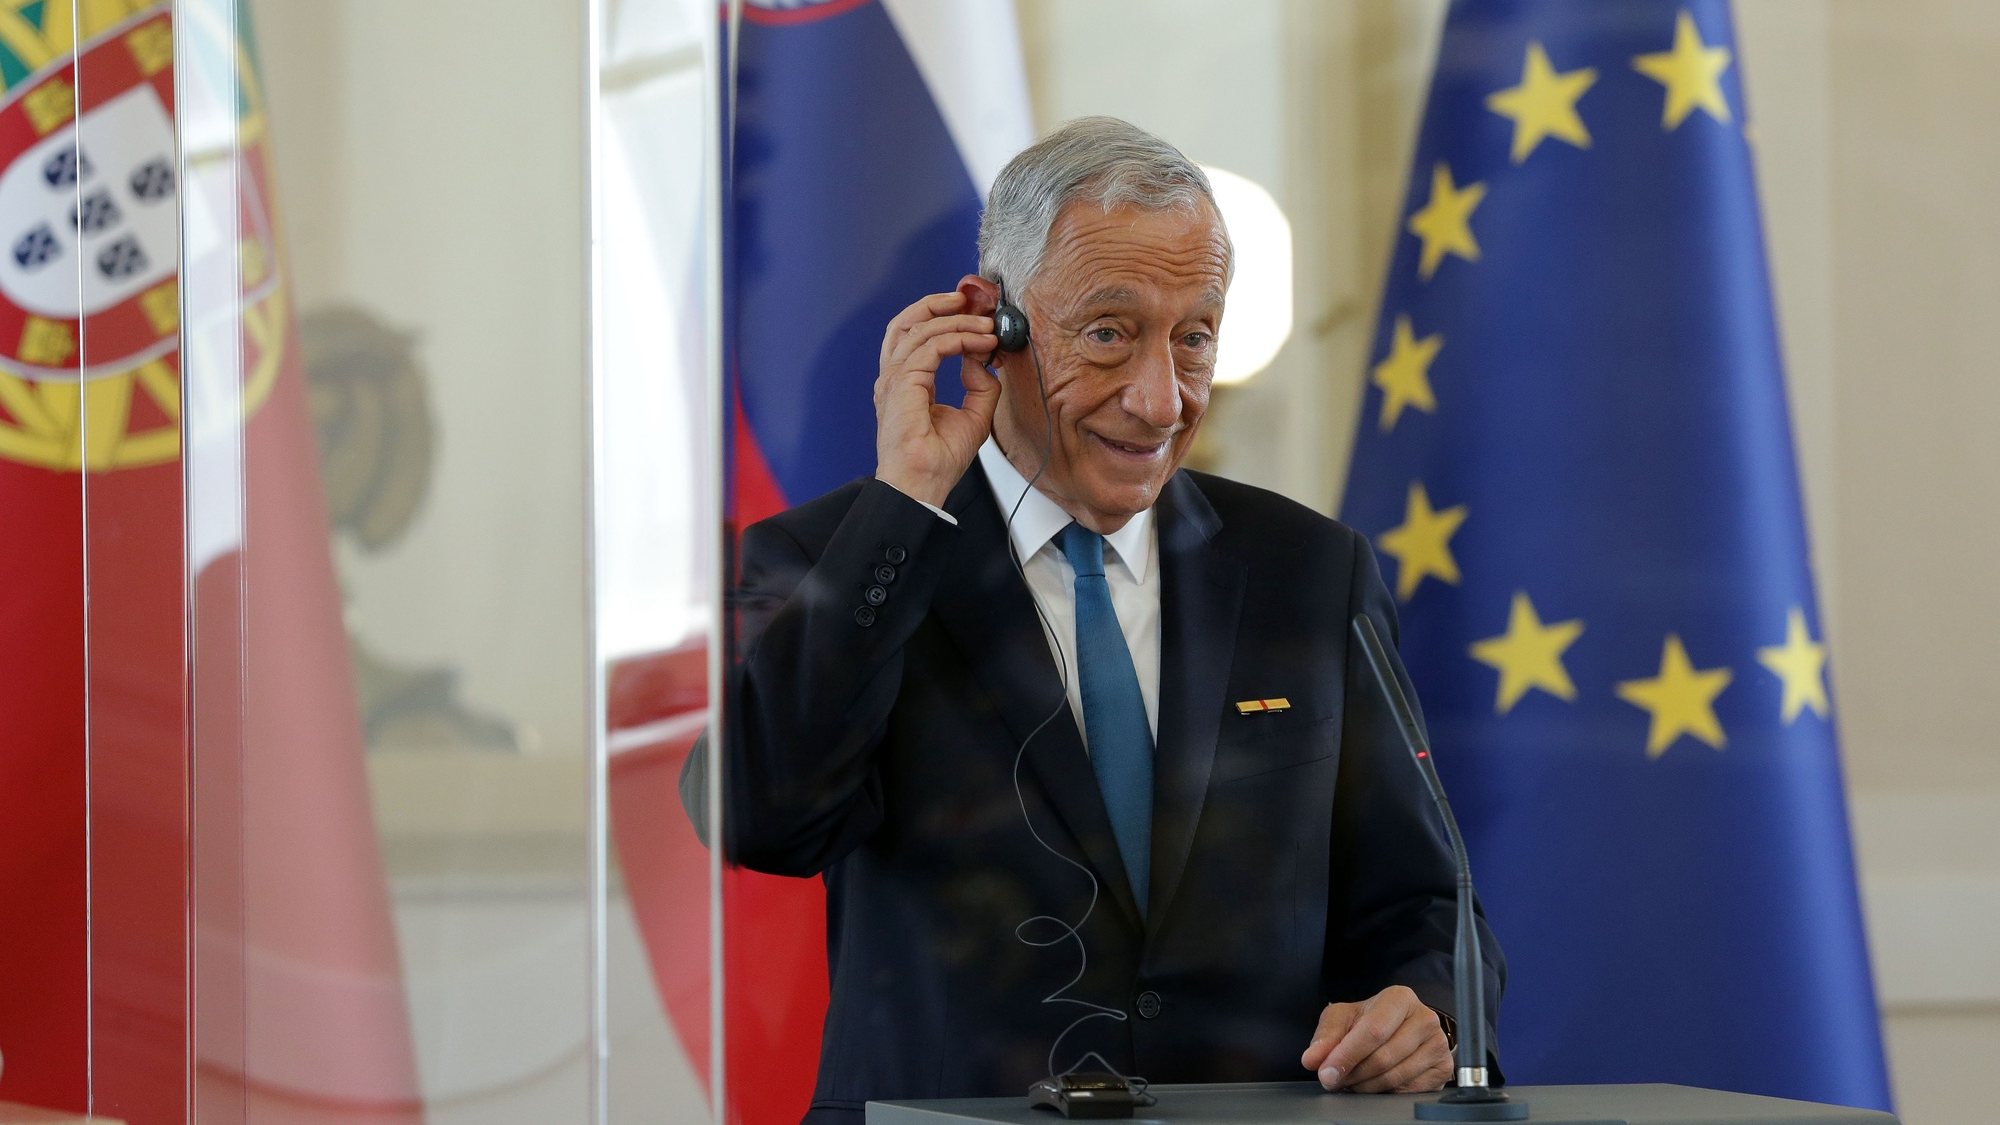 The President of Portugal, Marcelo Rebelo de Sousa during a joint press conference at the Presidential Palace in Ljubljana, Slovenia, 31 May 2021. Marcelo Rebelo de Sousa is on an official visit to Slovenia between Sunday and Tuesday, and will then head to Bulgaria. ESTELA SILVA/LUSA